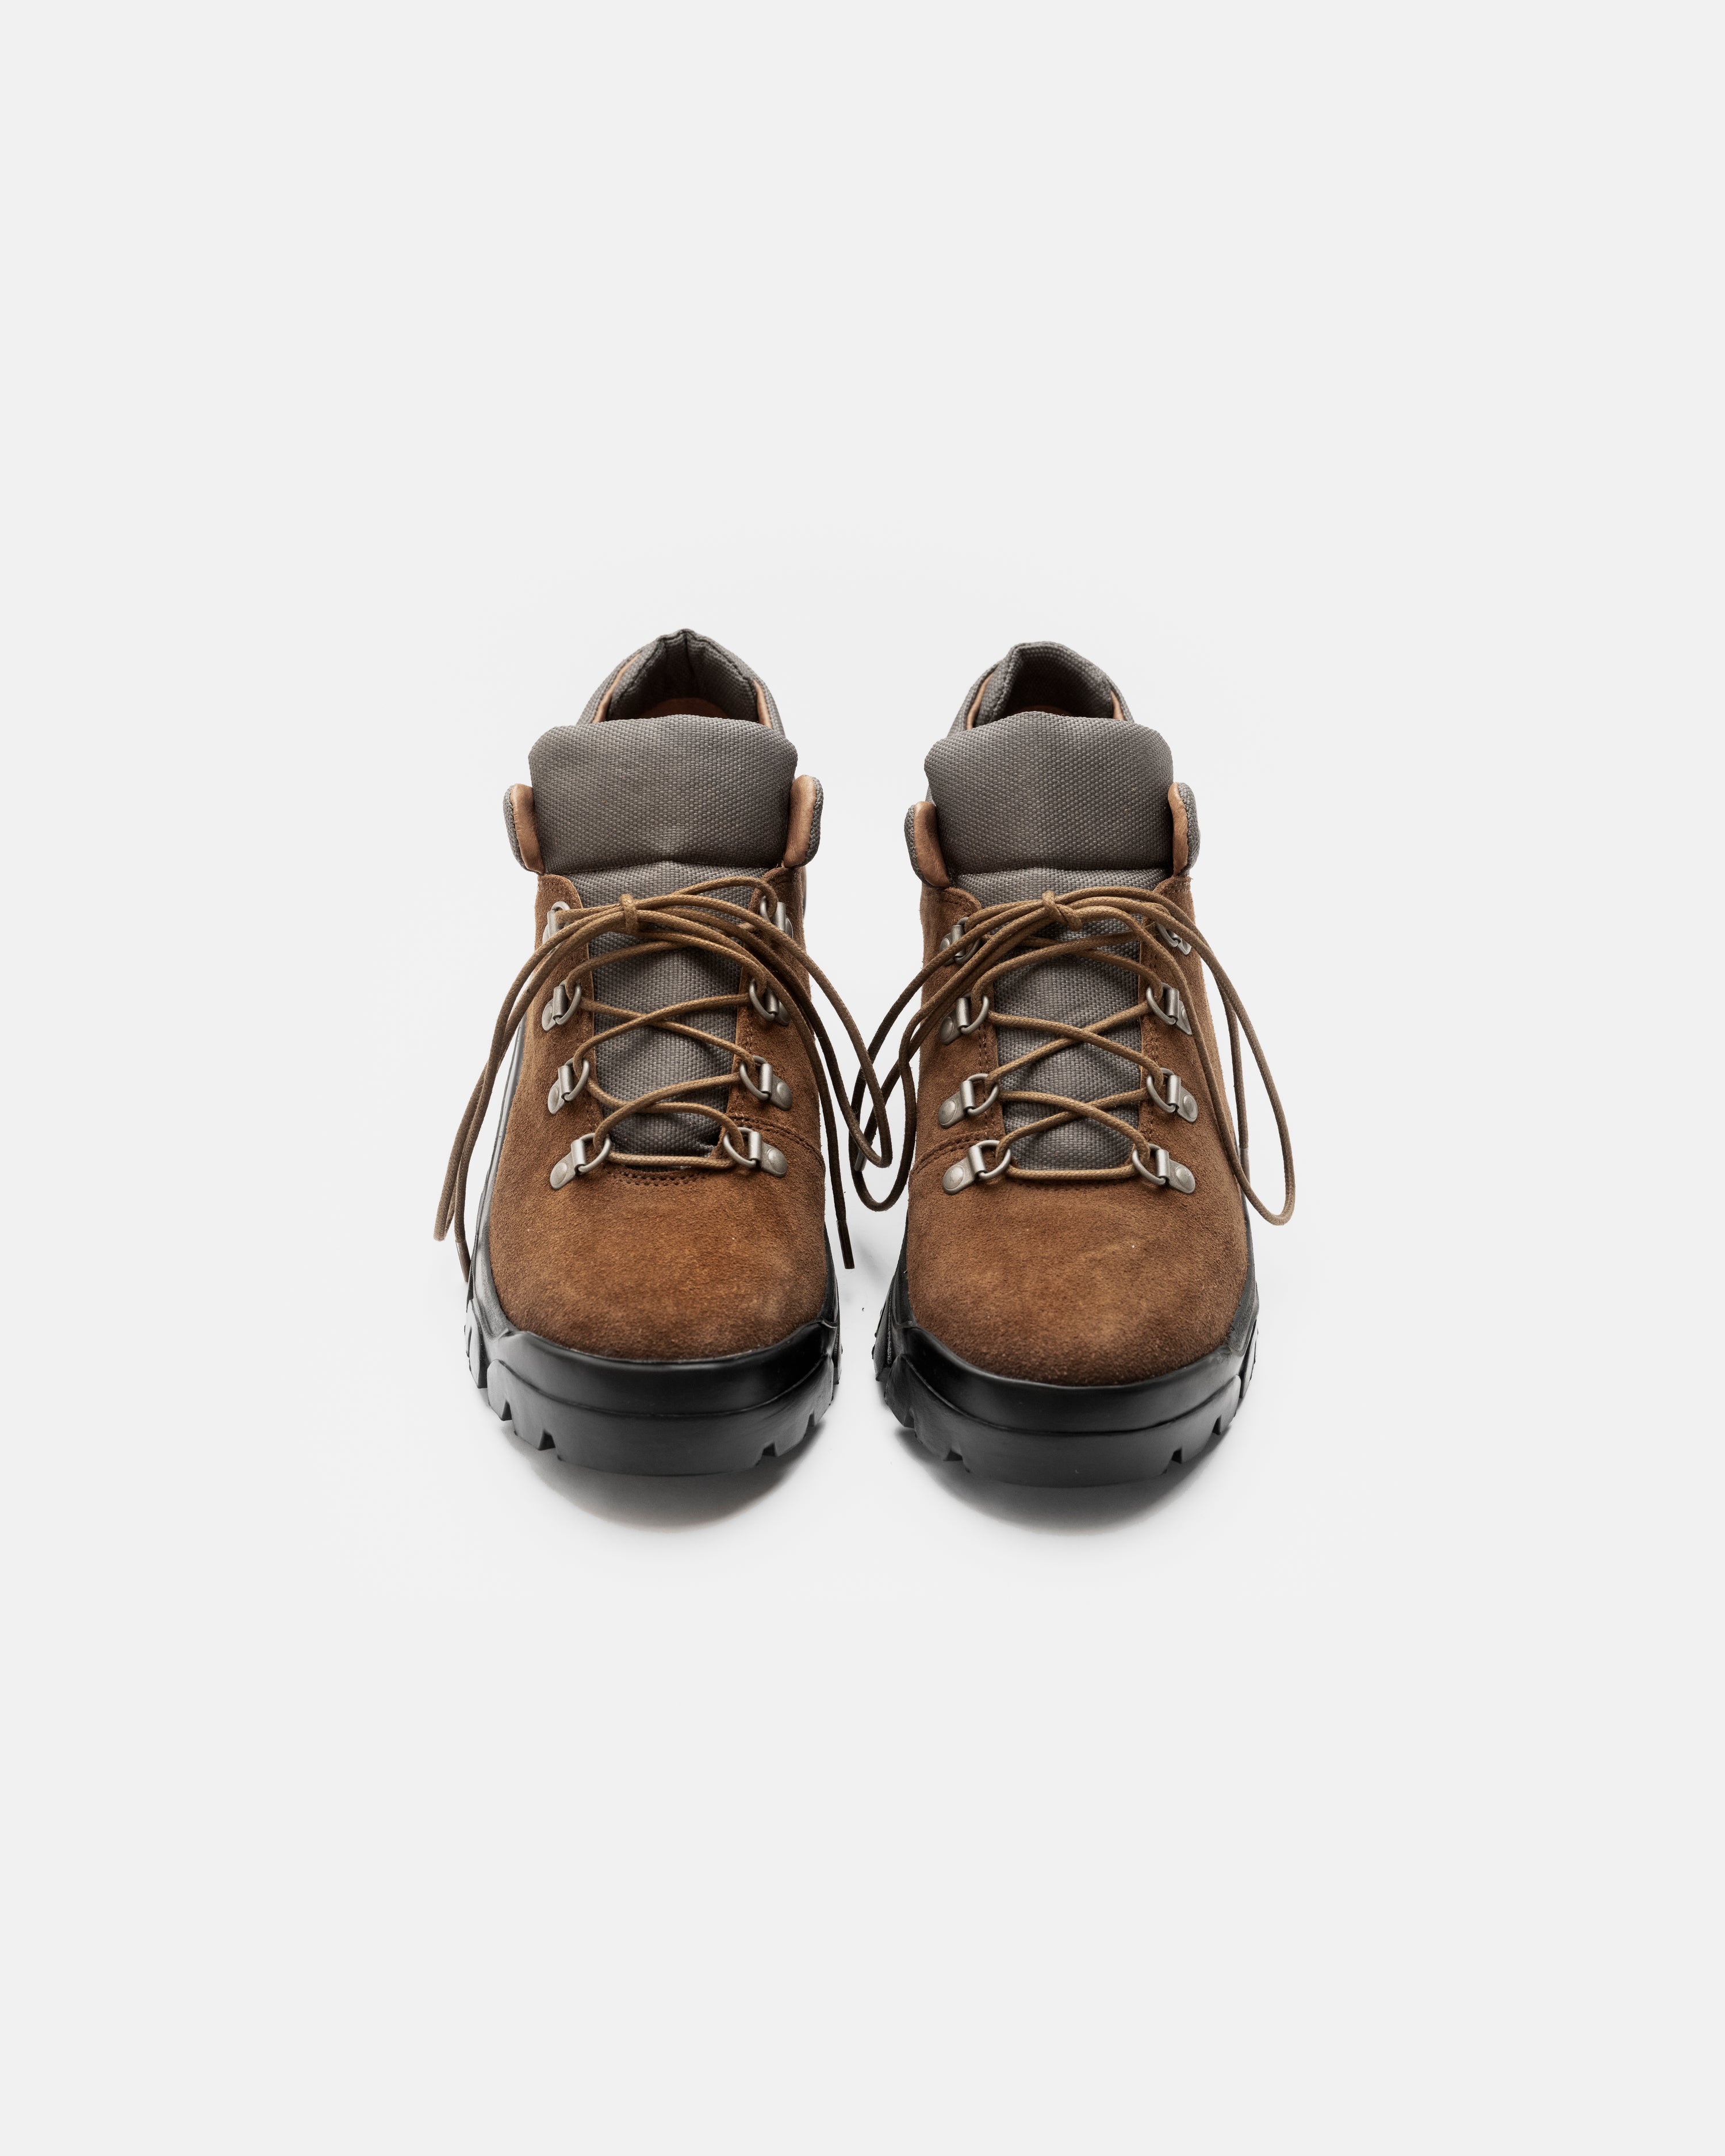 OAKLEDGE HIKER LOW BOOT - ALMOND ITALIAN SUEDE WITH SAGE CORDURA